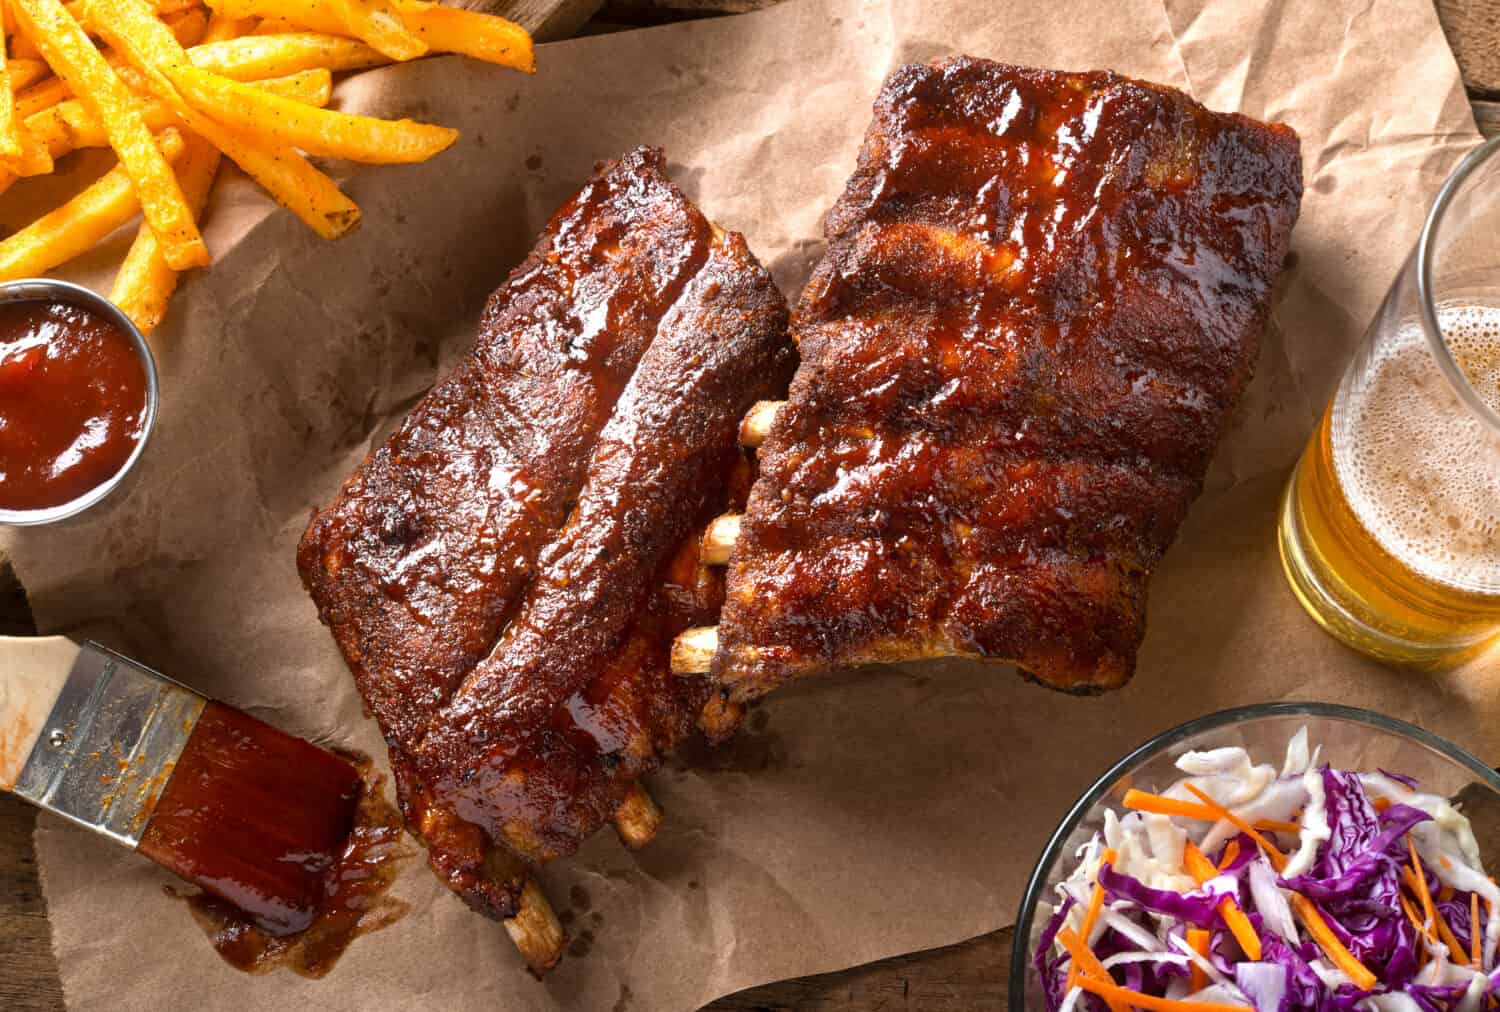 A rack of delicious baby back ribs with barbecue sauce, french fries, coleslaw and beer.